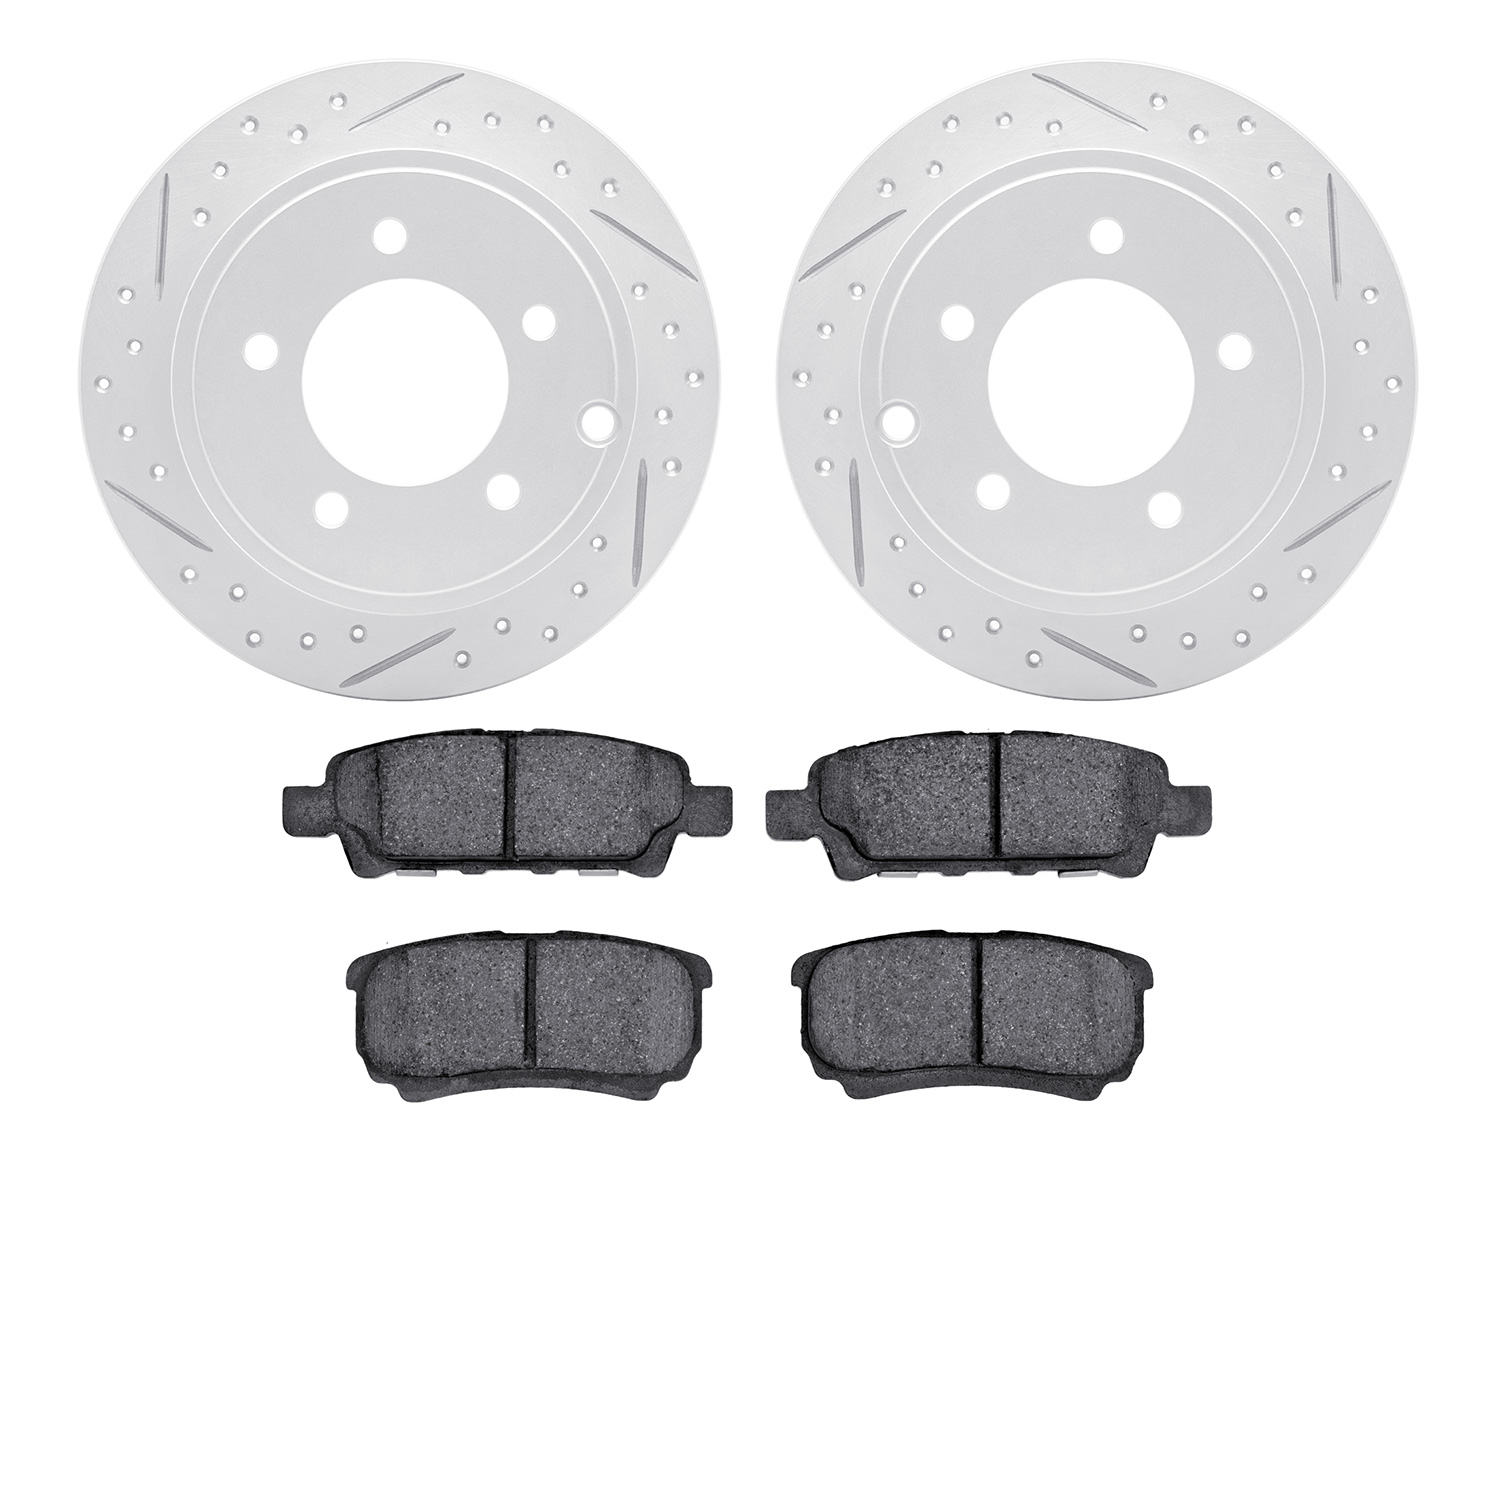 2502-39031 Geoperformance Drilled/Slotted Rotors w/5000 Advanced Brake Pads Kit, 2007-2017 Multiple Makes/Models, Position: Rear